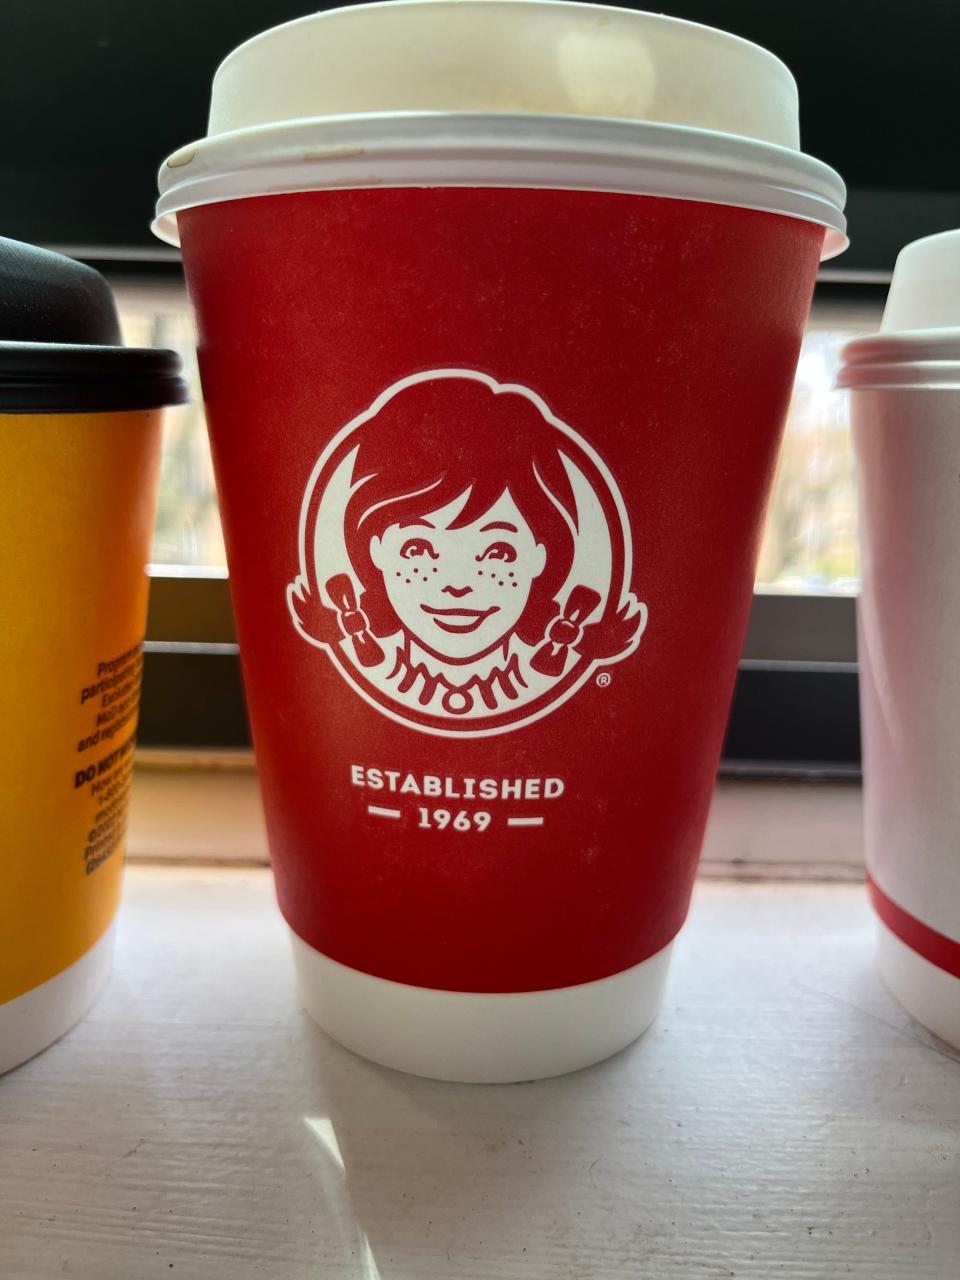 cup of wendy's coffee sitting on a window ledge